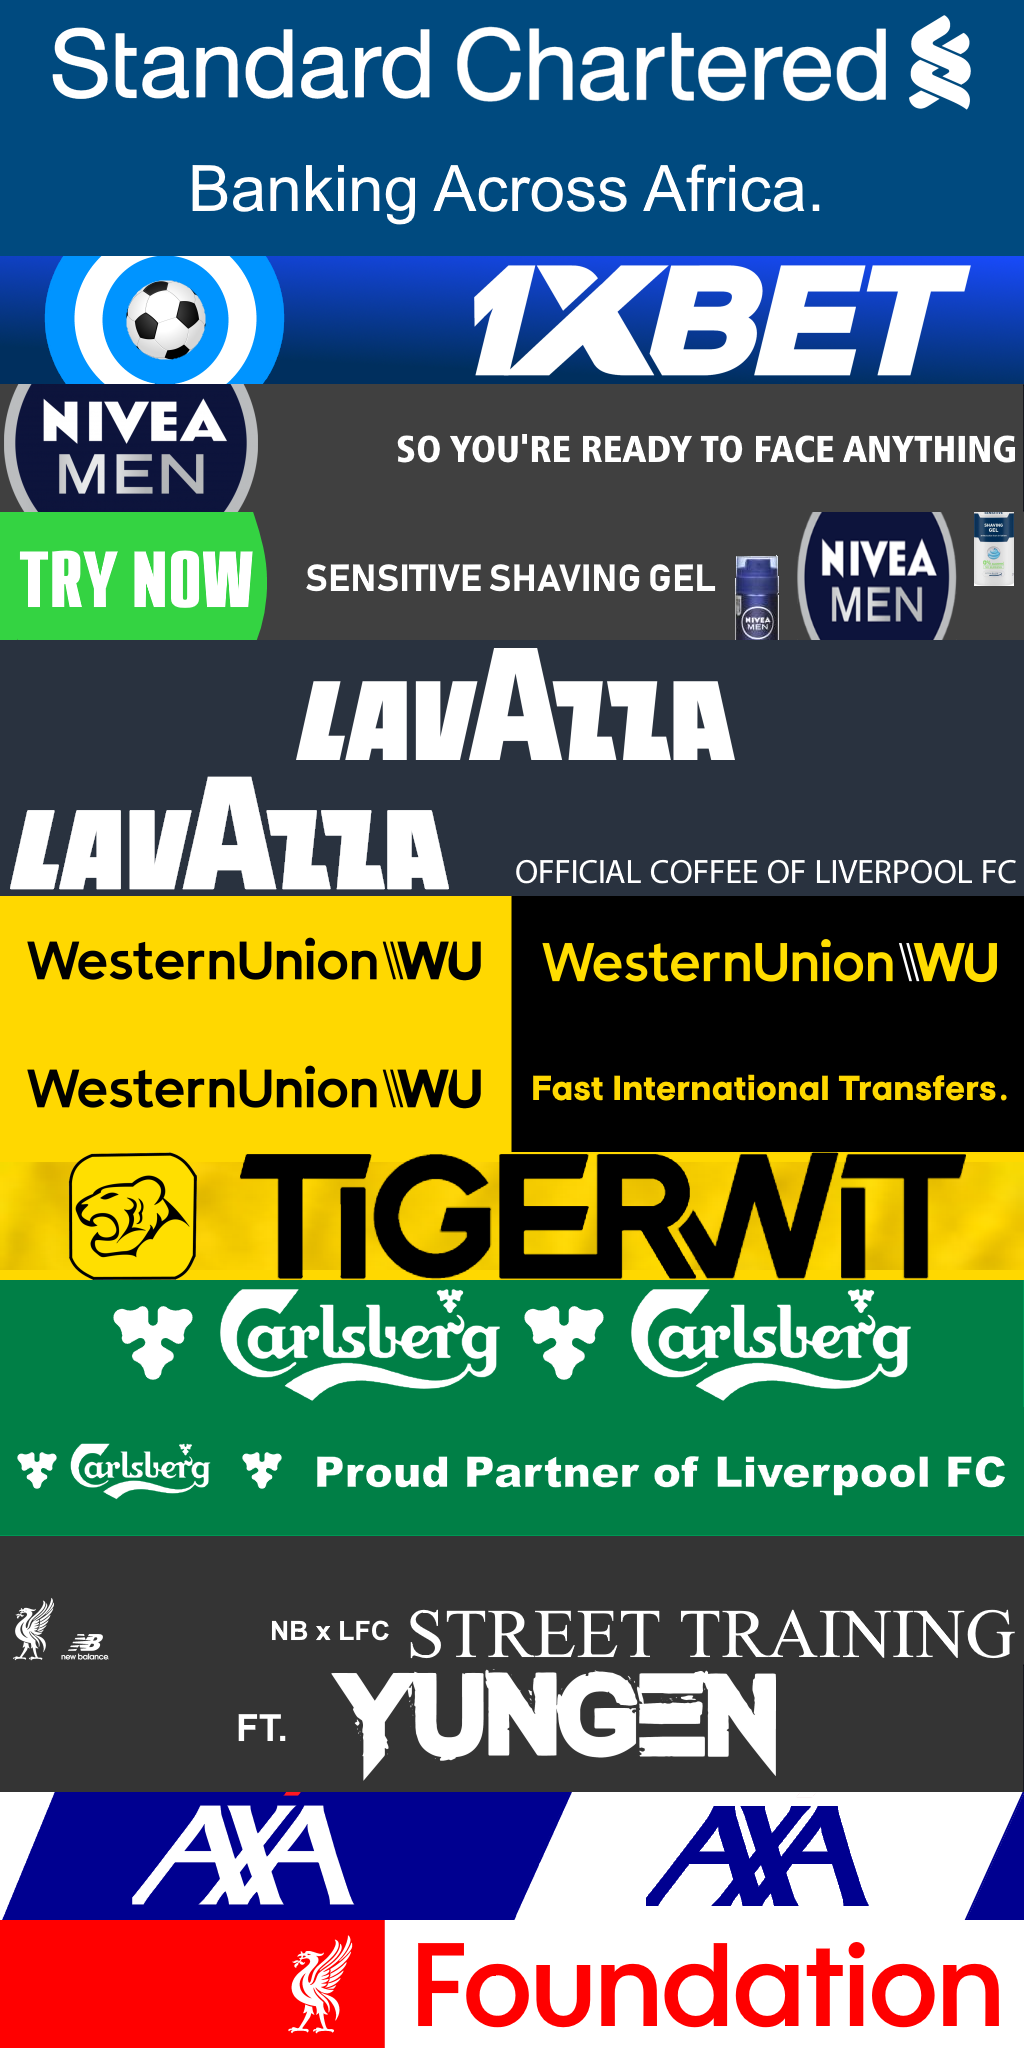 LIVERPOOL_ADBOARDS_0.png